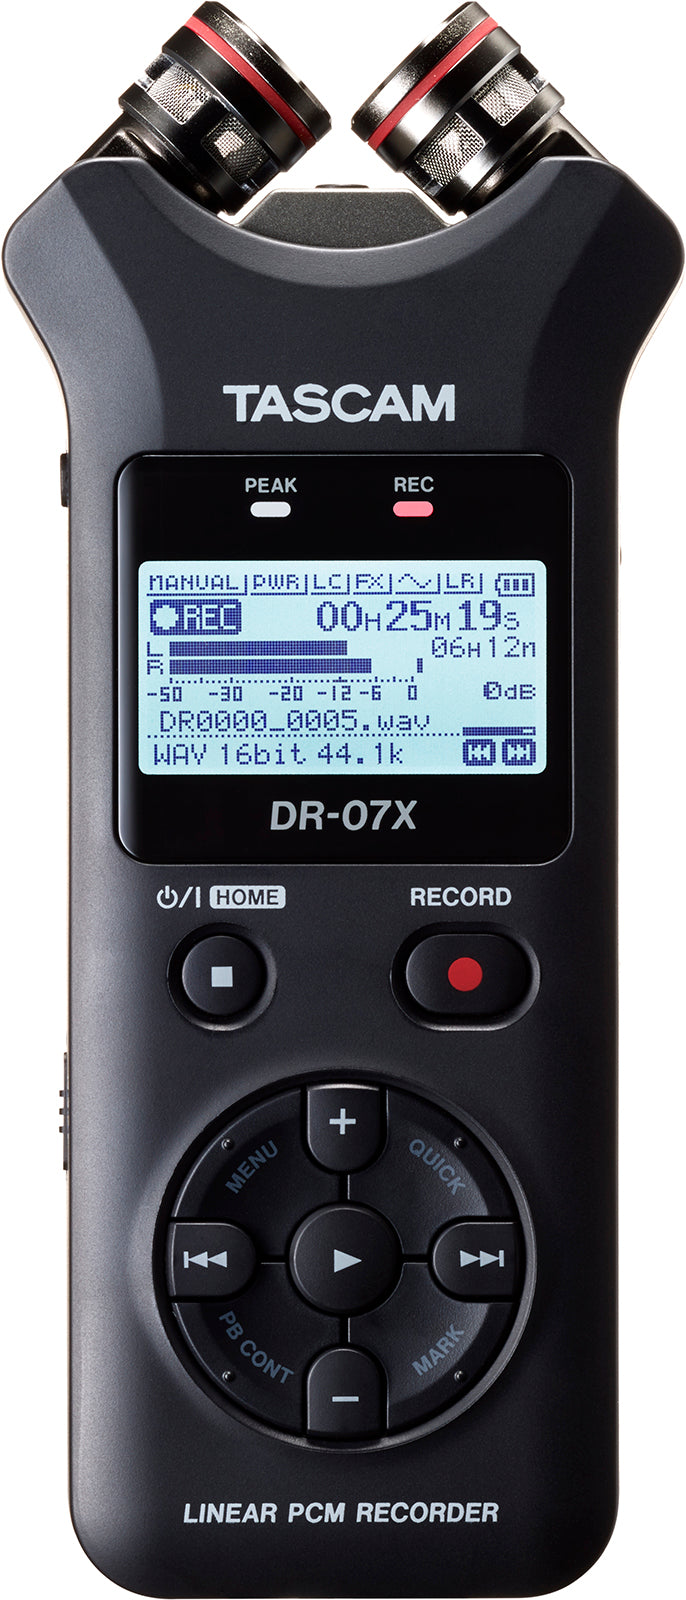 Tascam DR-07X - Stereo Handheld Digital Audio Recorder/USB Interface - 305broadcast